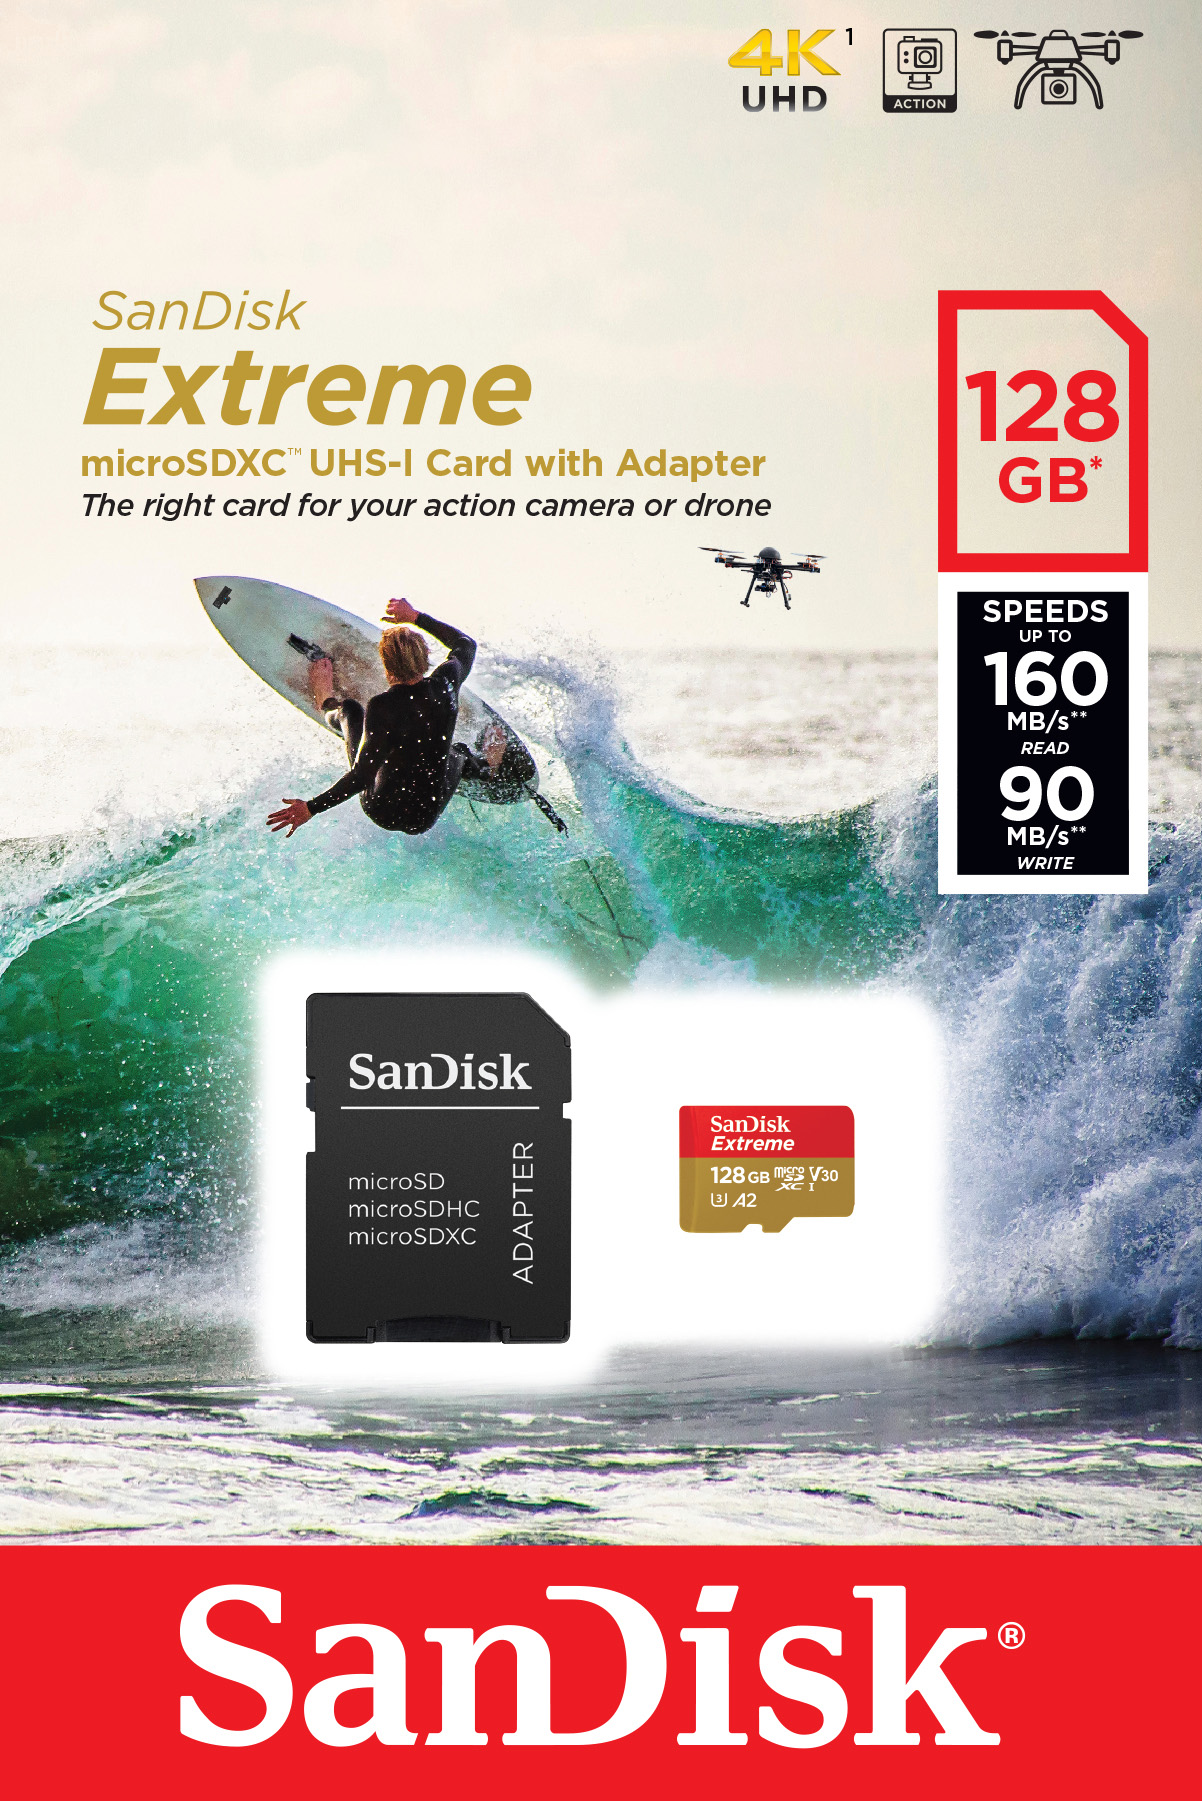 Sandisk microSDXC Card 128GB, Extreme, U3, A2, 4K UHD (R) 160MB/s, (W) 90MB/s, SD Adapter, Retail-Blister